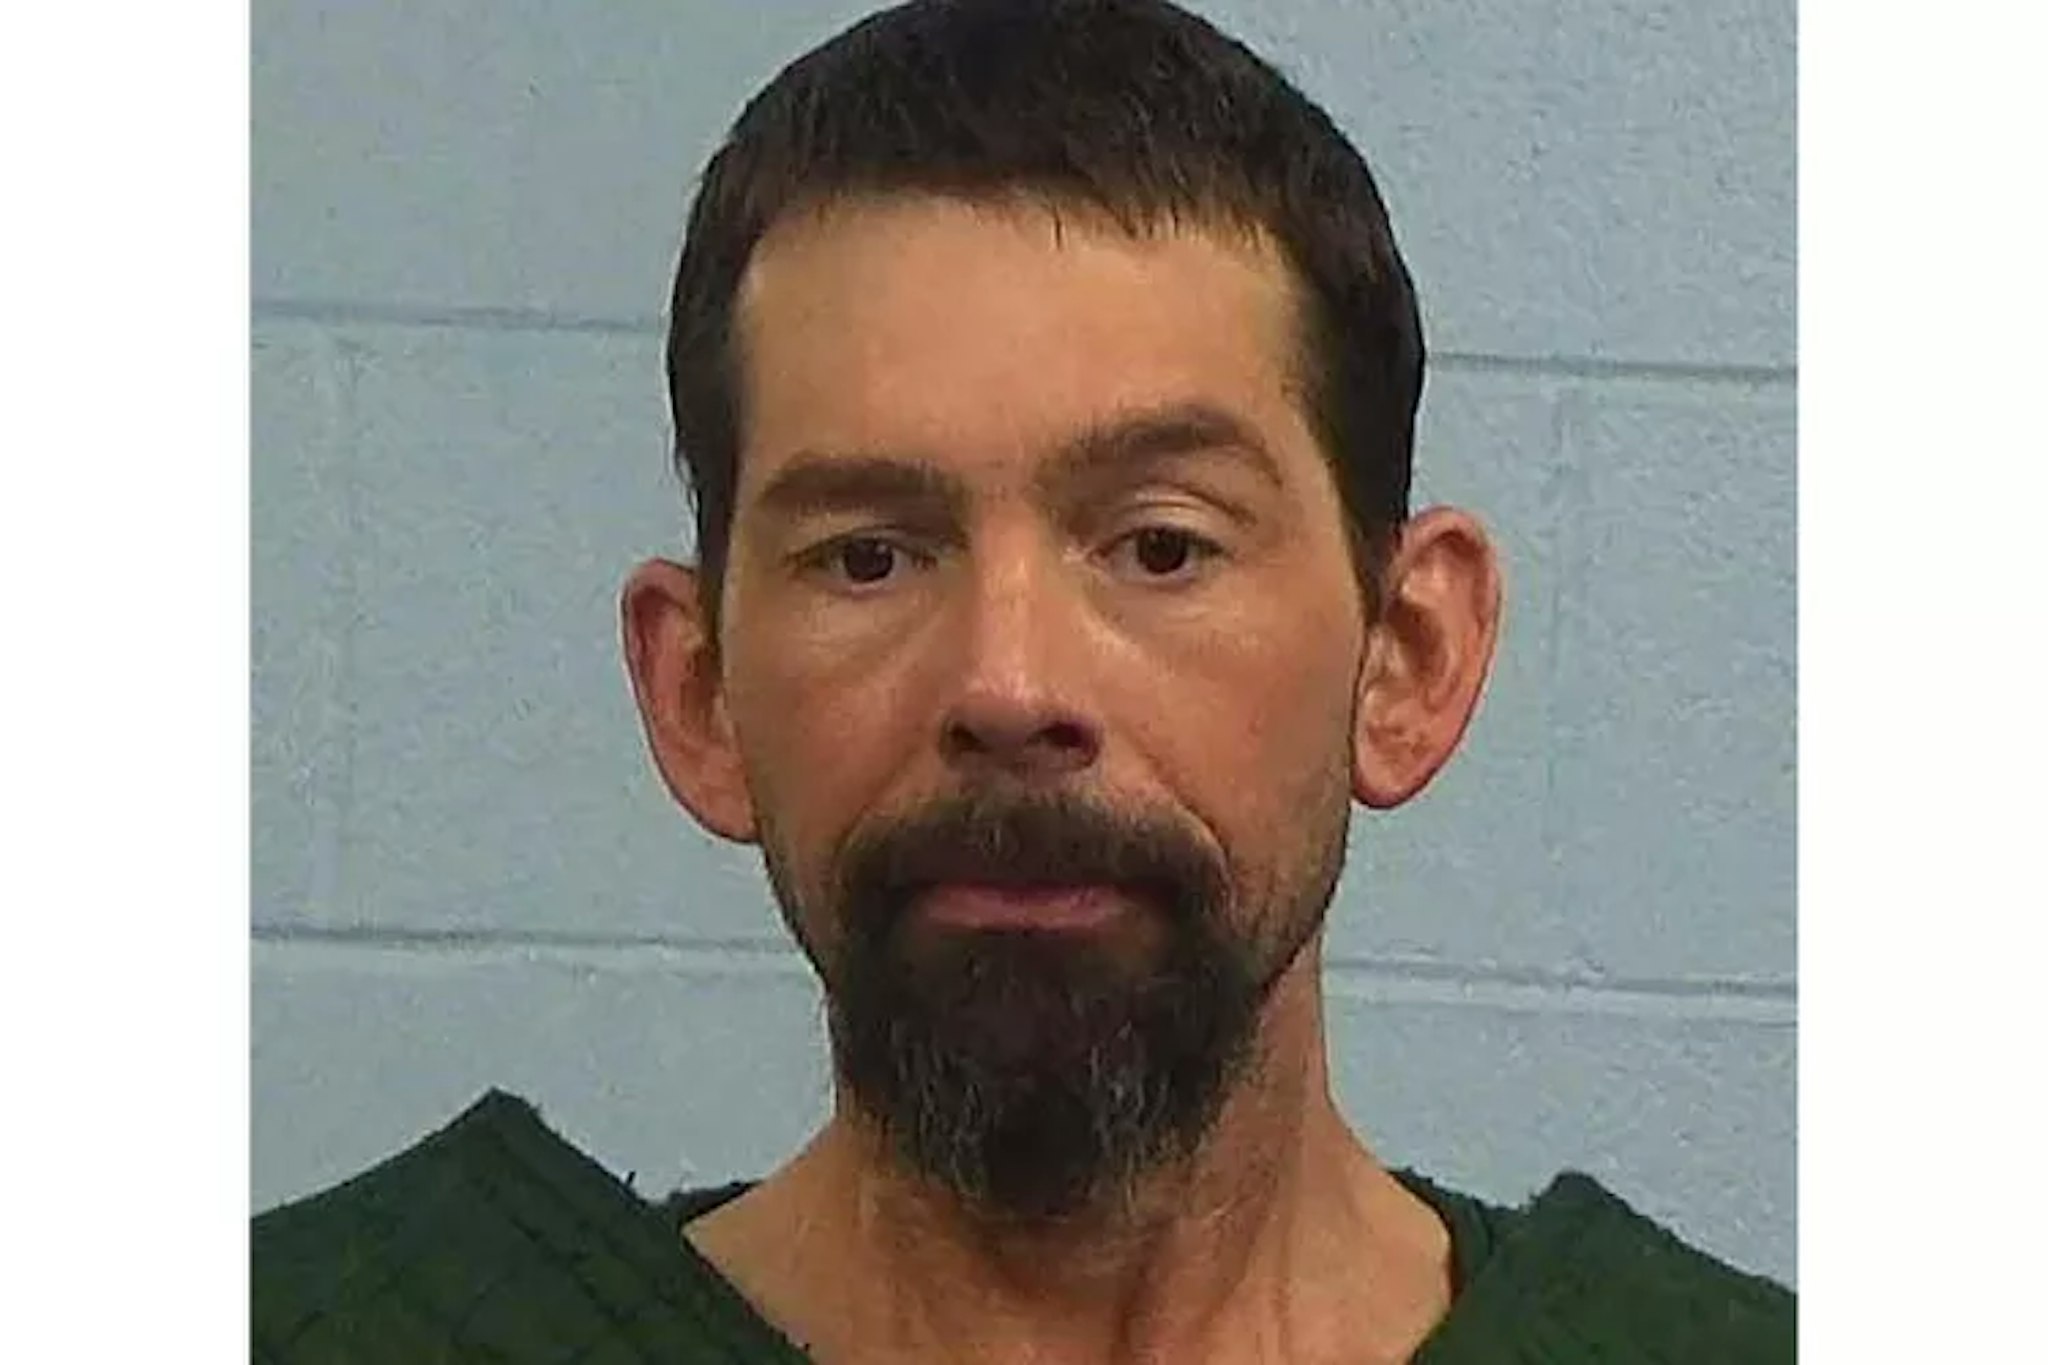 Seth B. Carnes, 45, has been charged with capital murder after allegedly confessing to the murders of his parents.